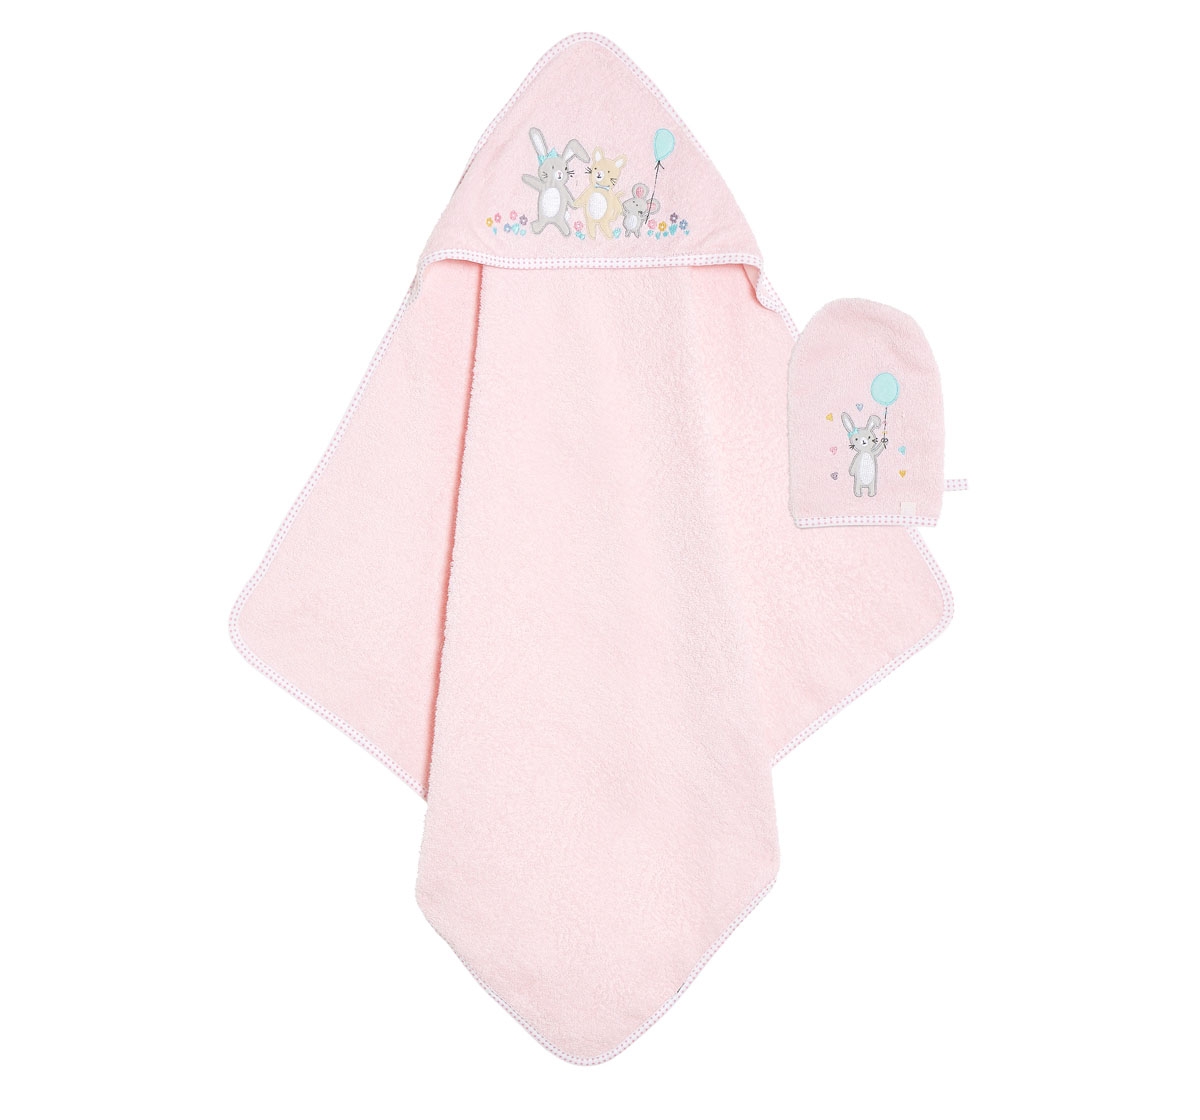 Mothercare | Confetti Party Cuddle 'N' Dry and Mitt Set 0